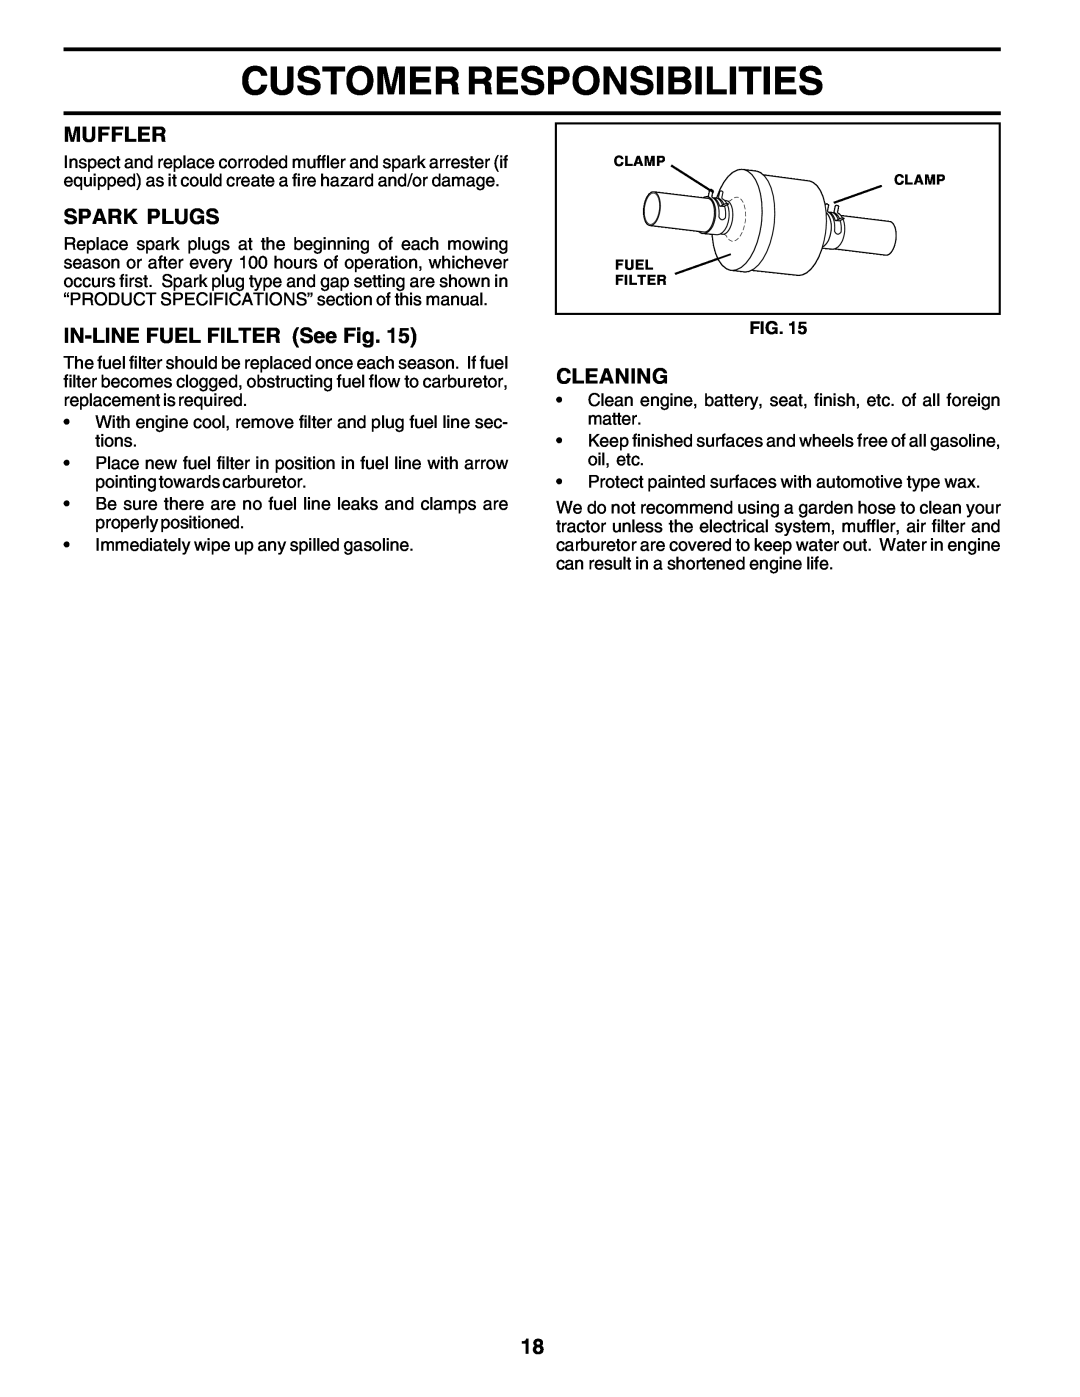 Poulan PO14542B owner manual Muffler, Spark Plugs, IN-LINE FUEL FILTER See Fig, Cleaning, Customer Responsibilities 